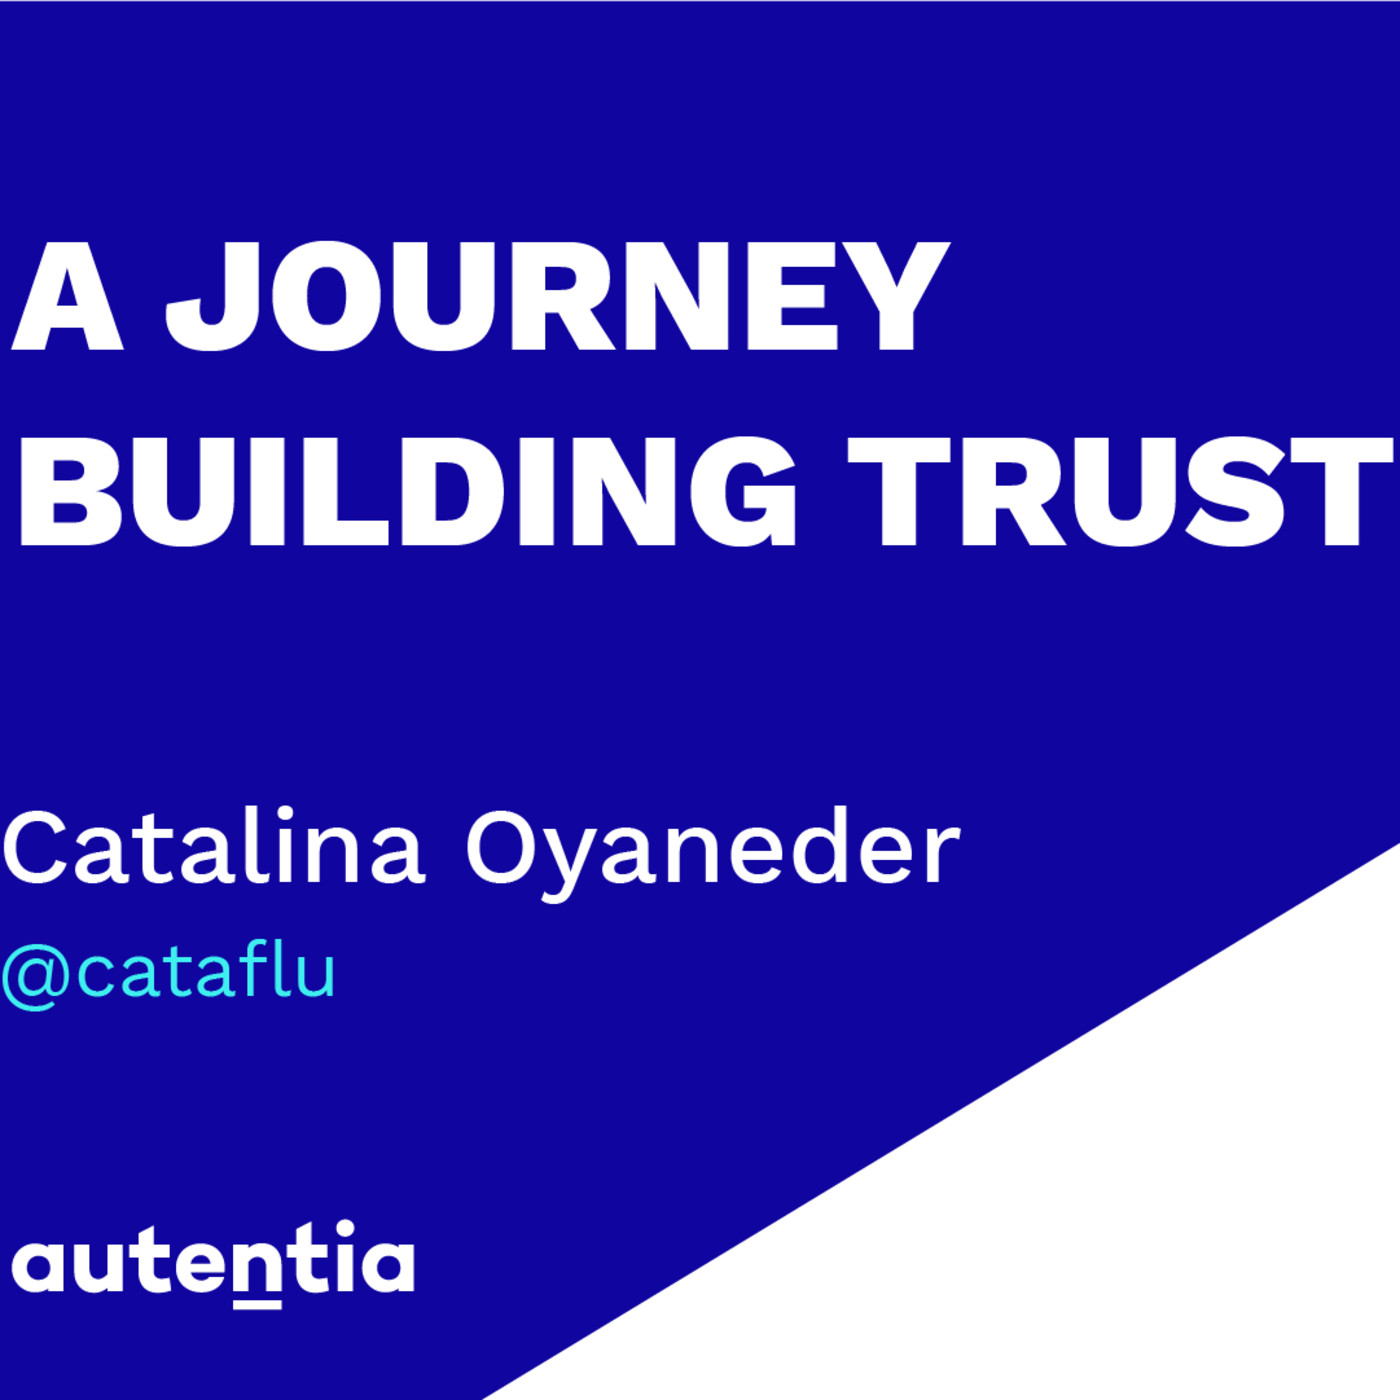 A journey building trust - Catalina Oyaneder